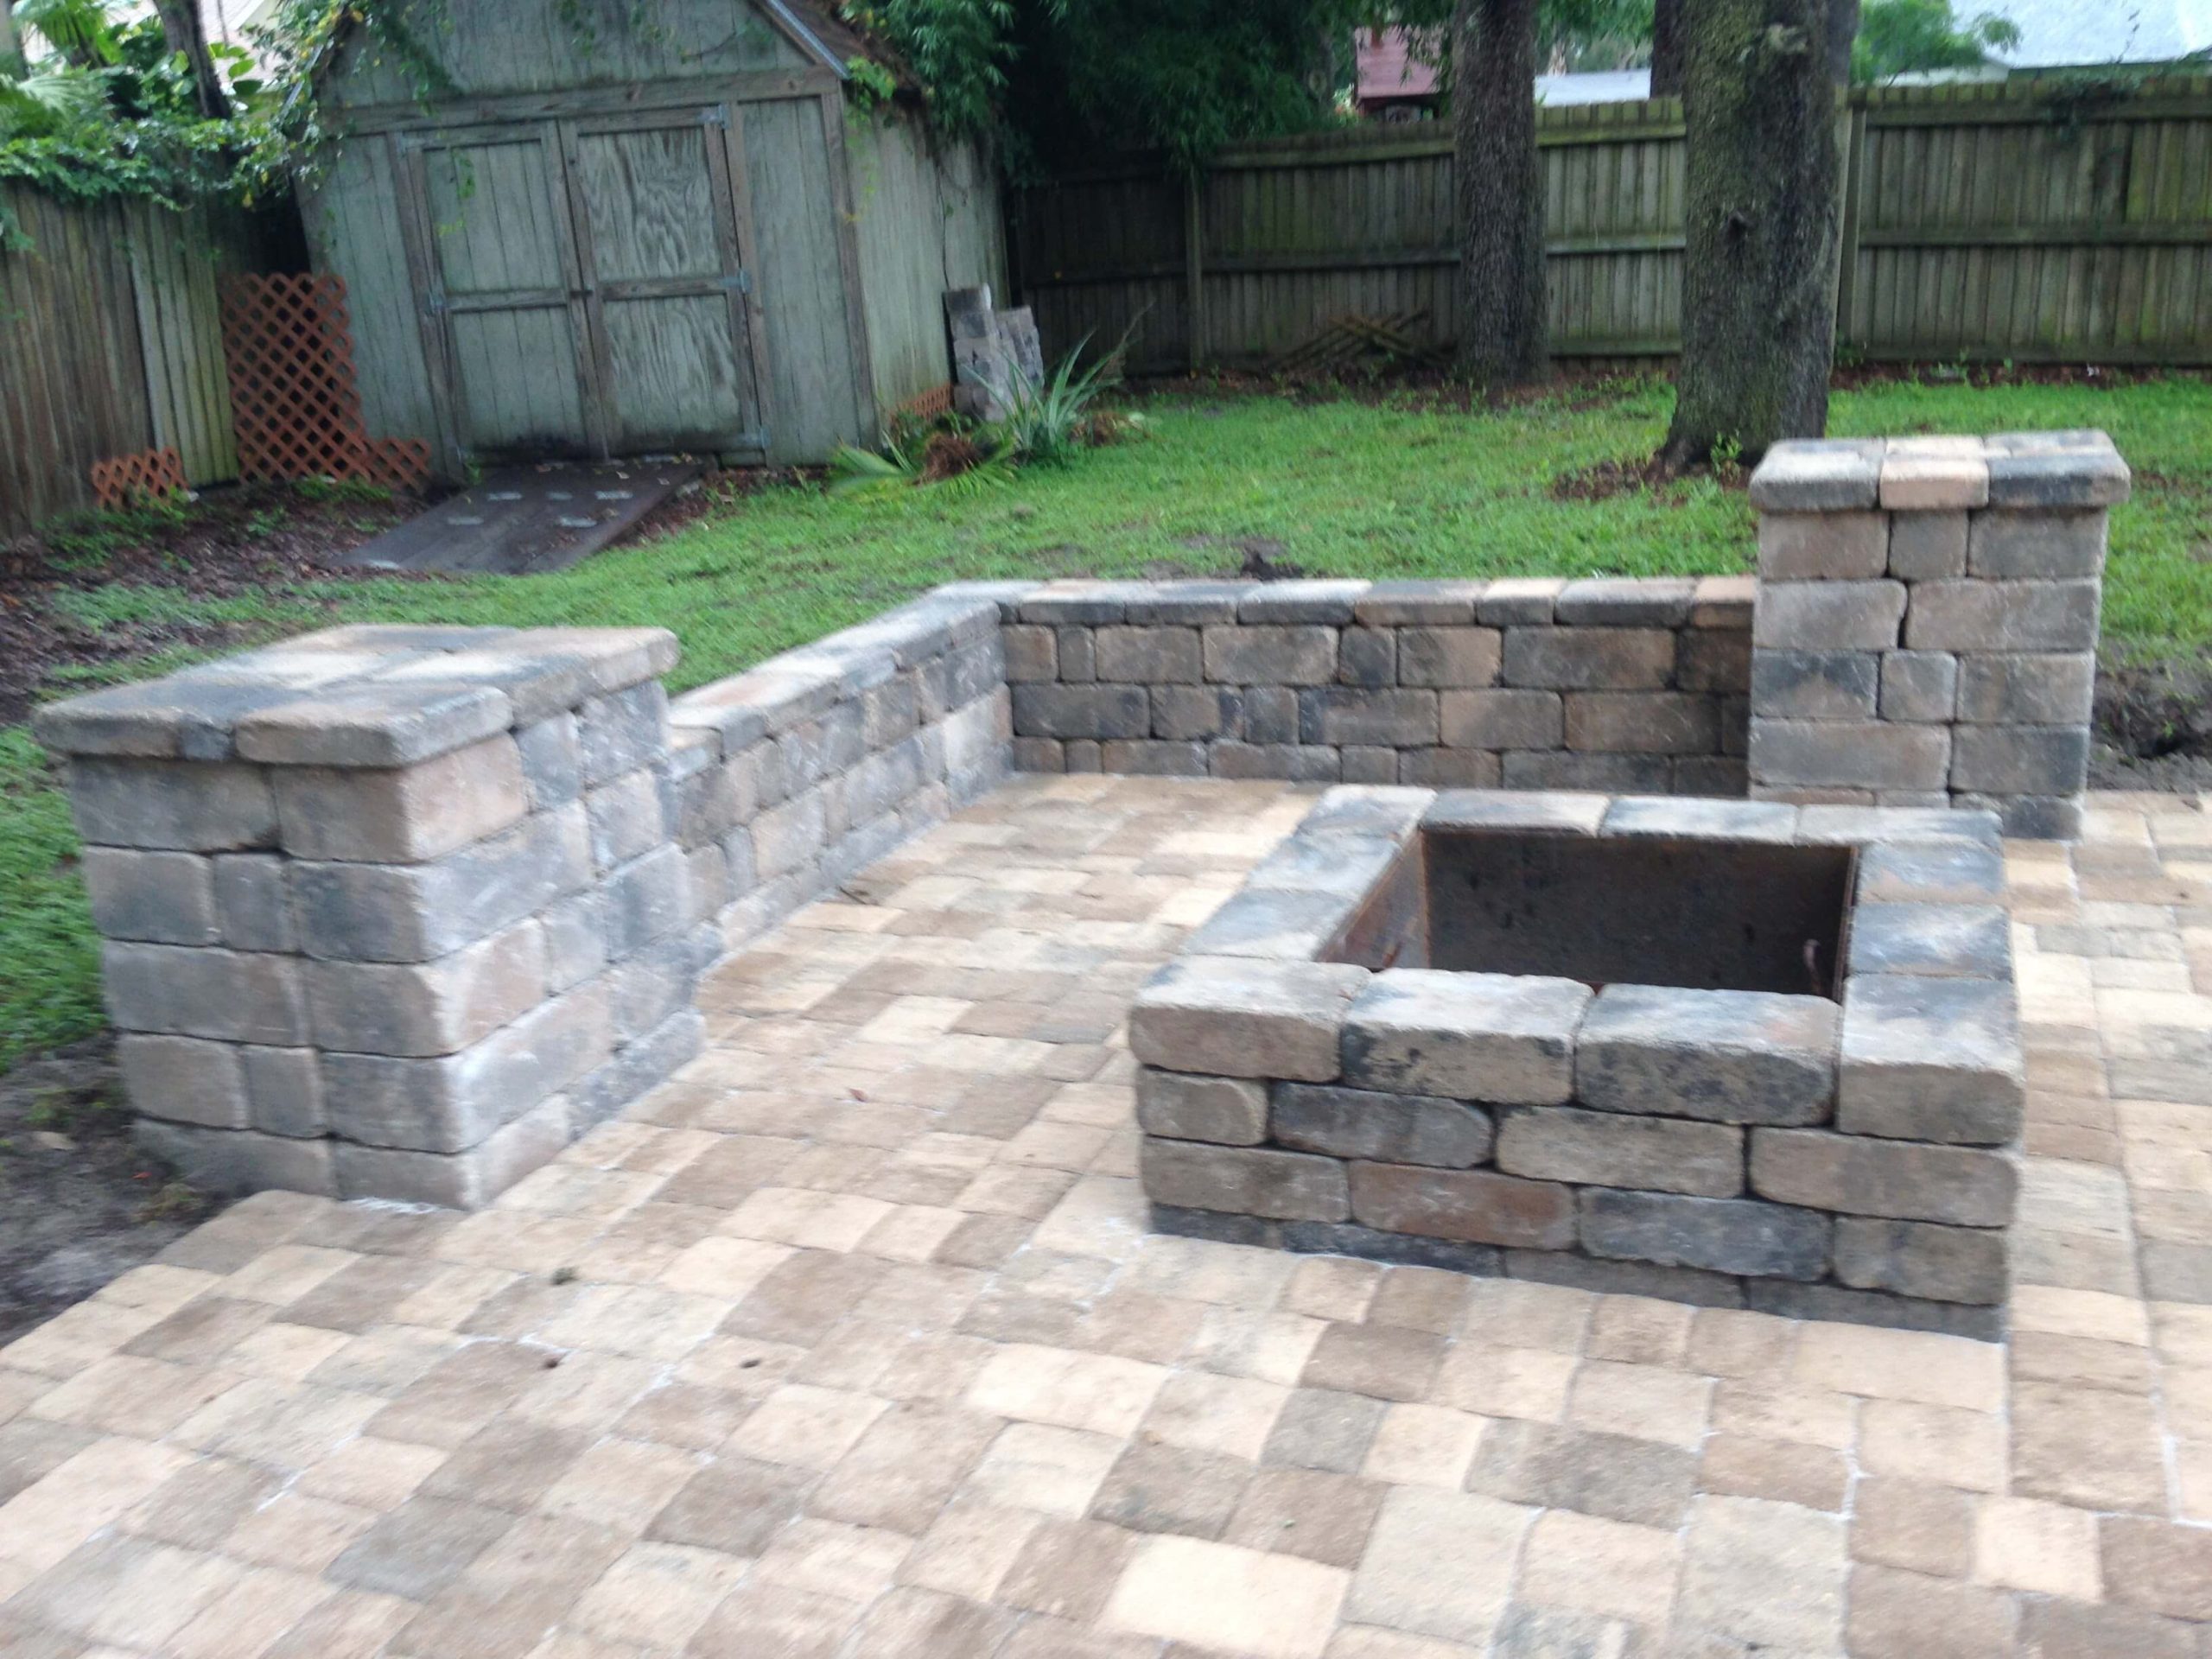 Fire Pits Bay Brick Pavers, How To Build A Fire Pit With Brick Pavers